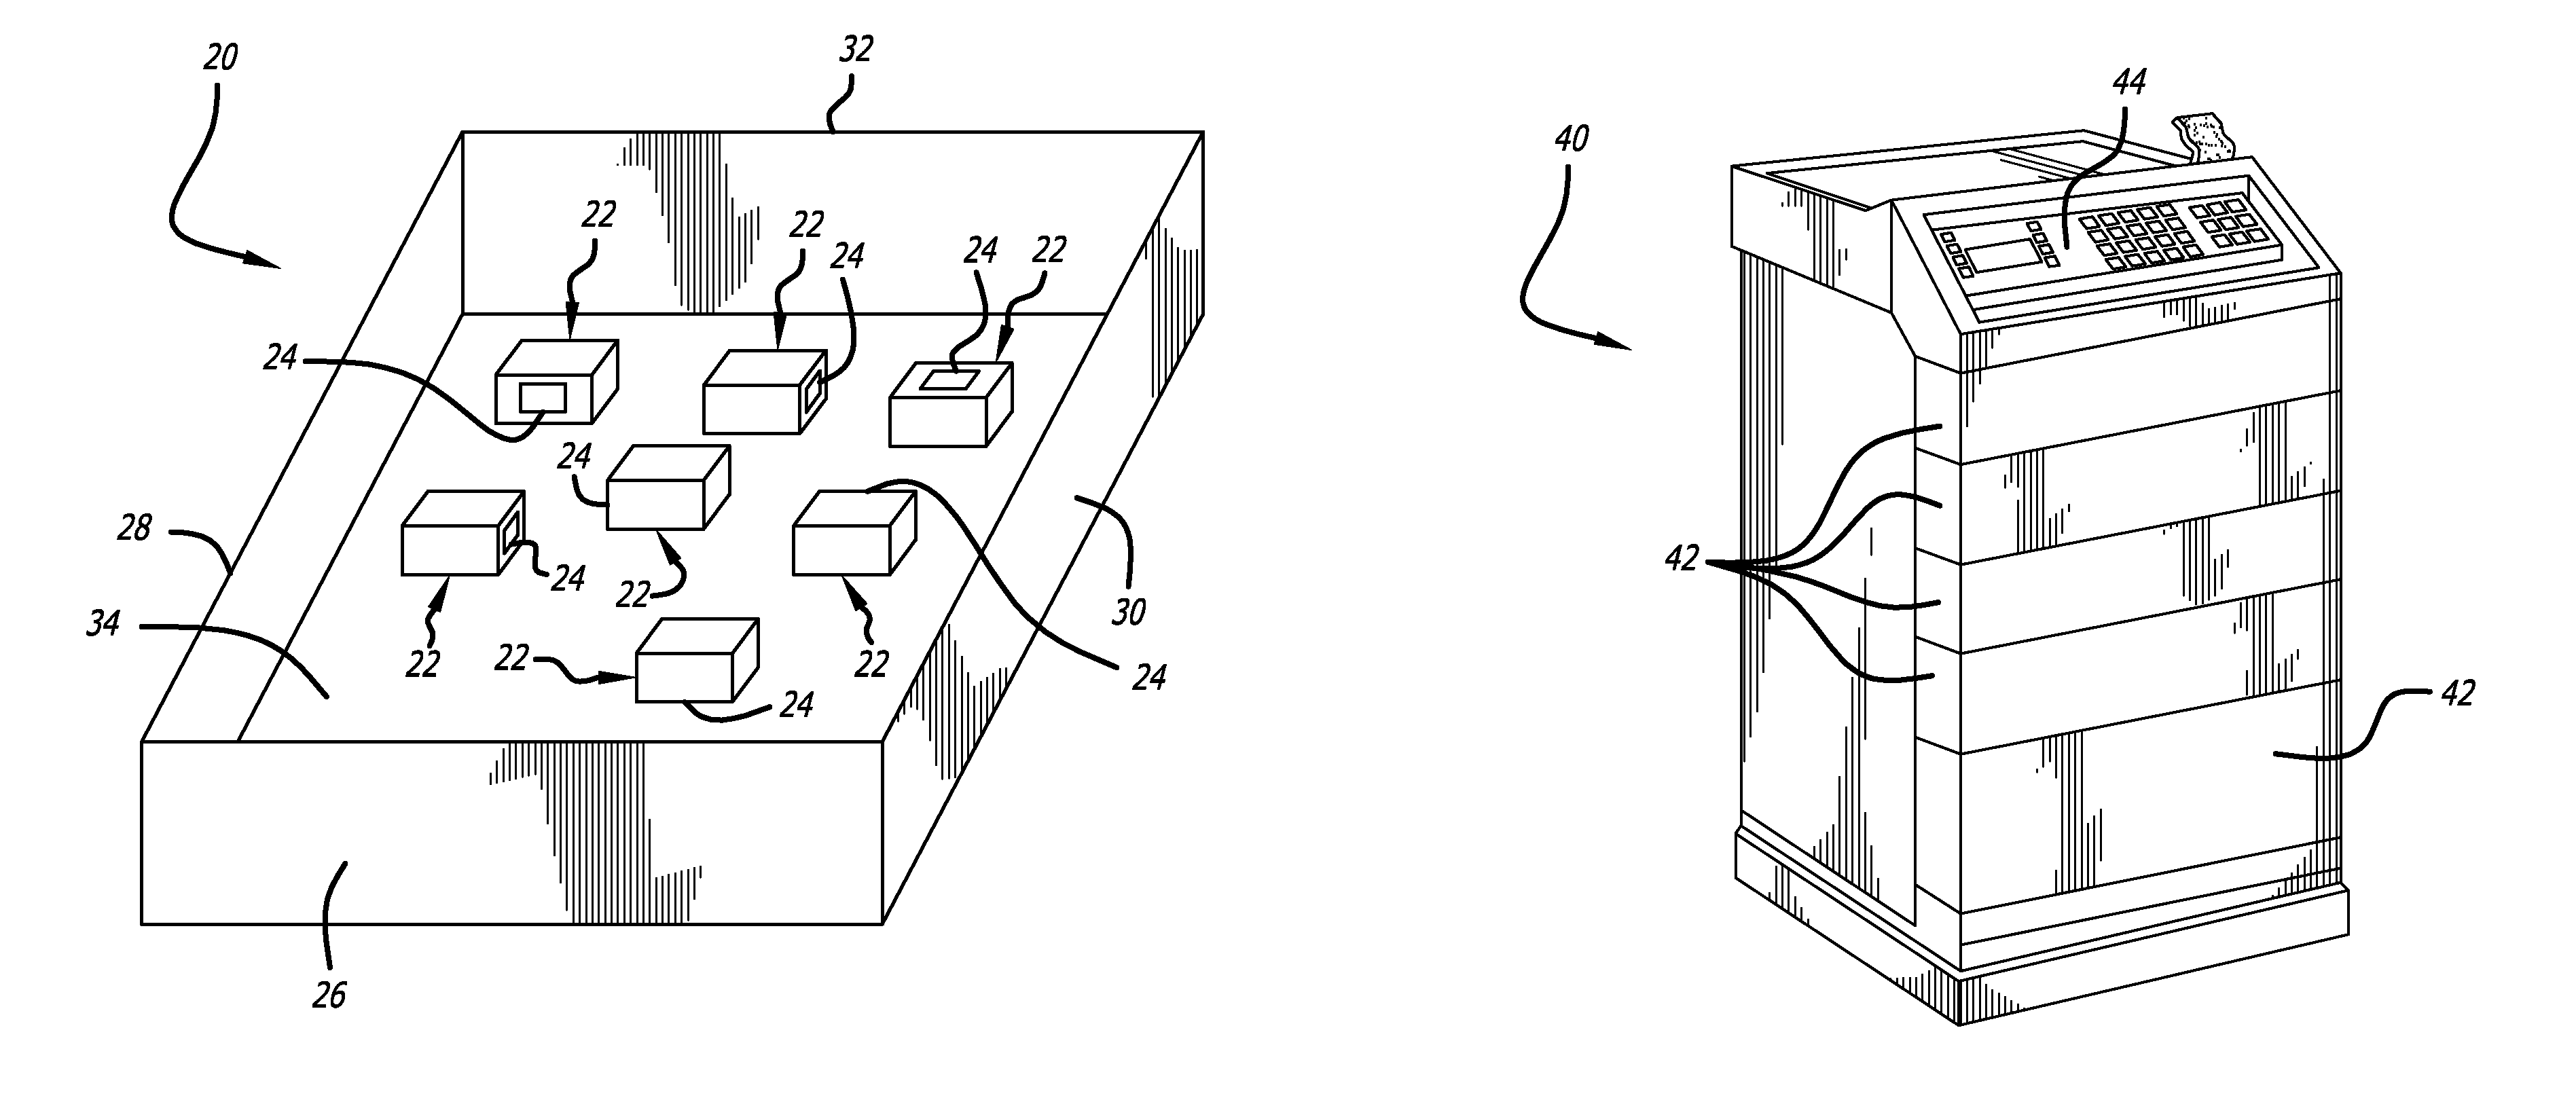 System and method of identifying tagged articles